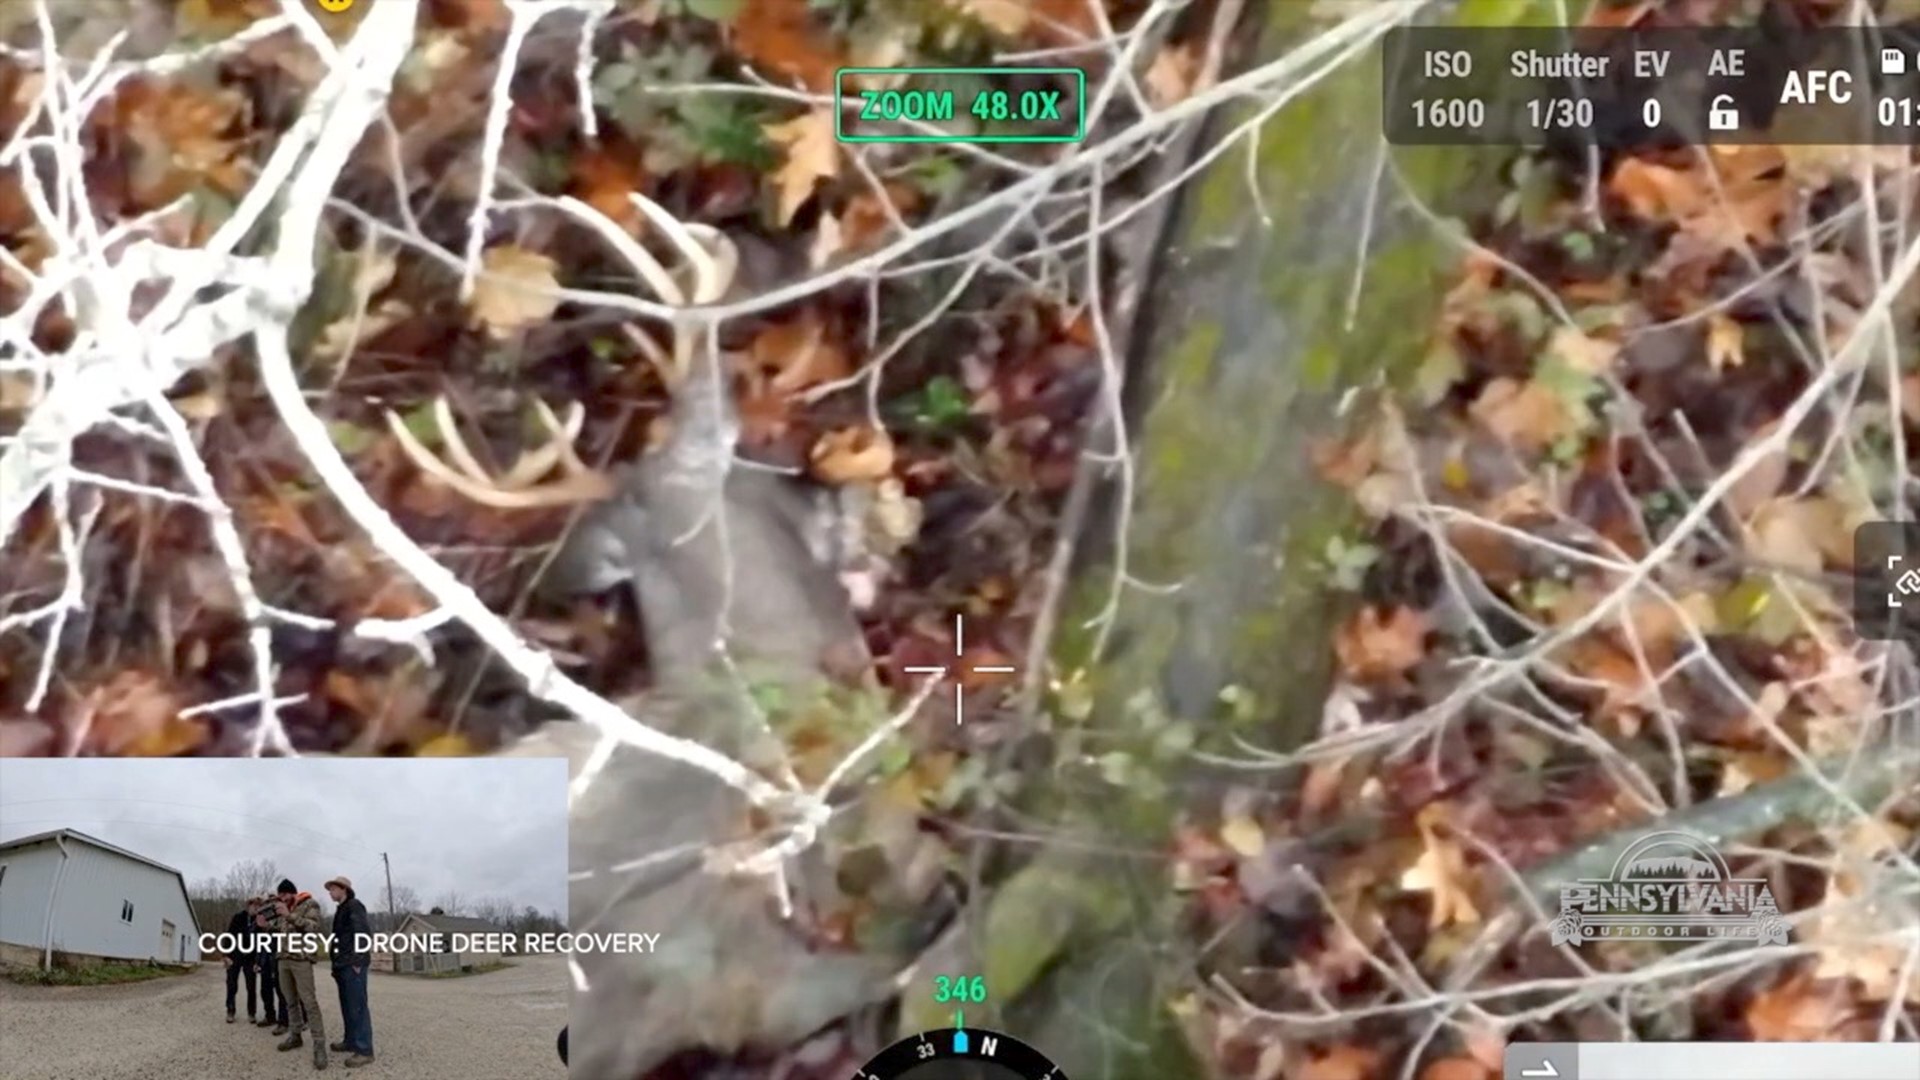 Using high tech drones to recover lost big game.